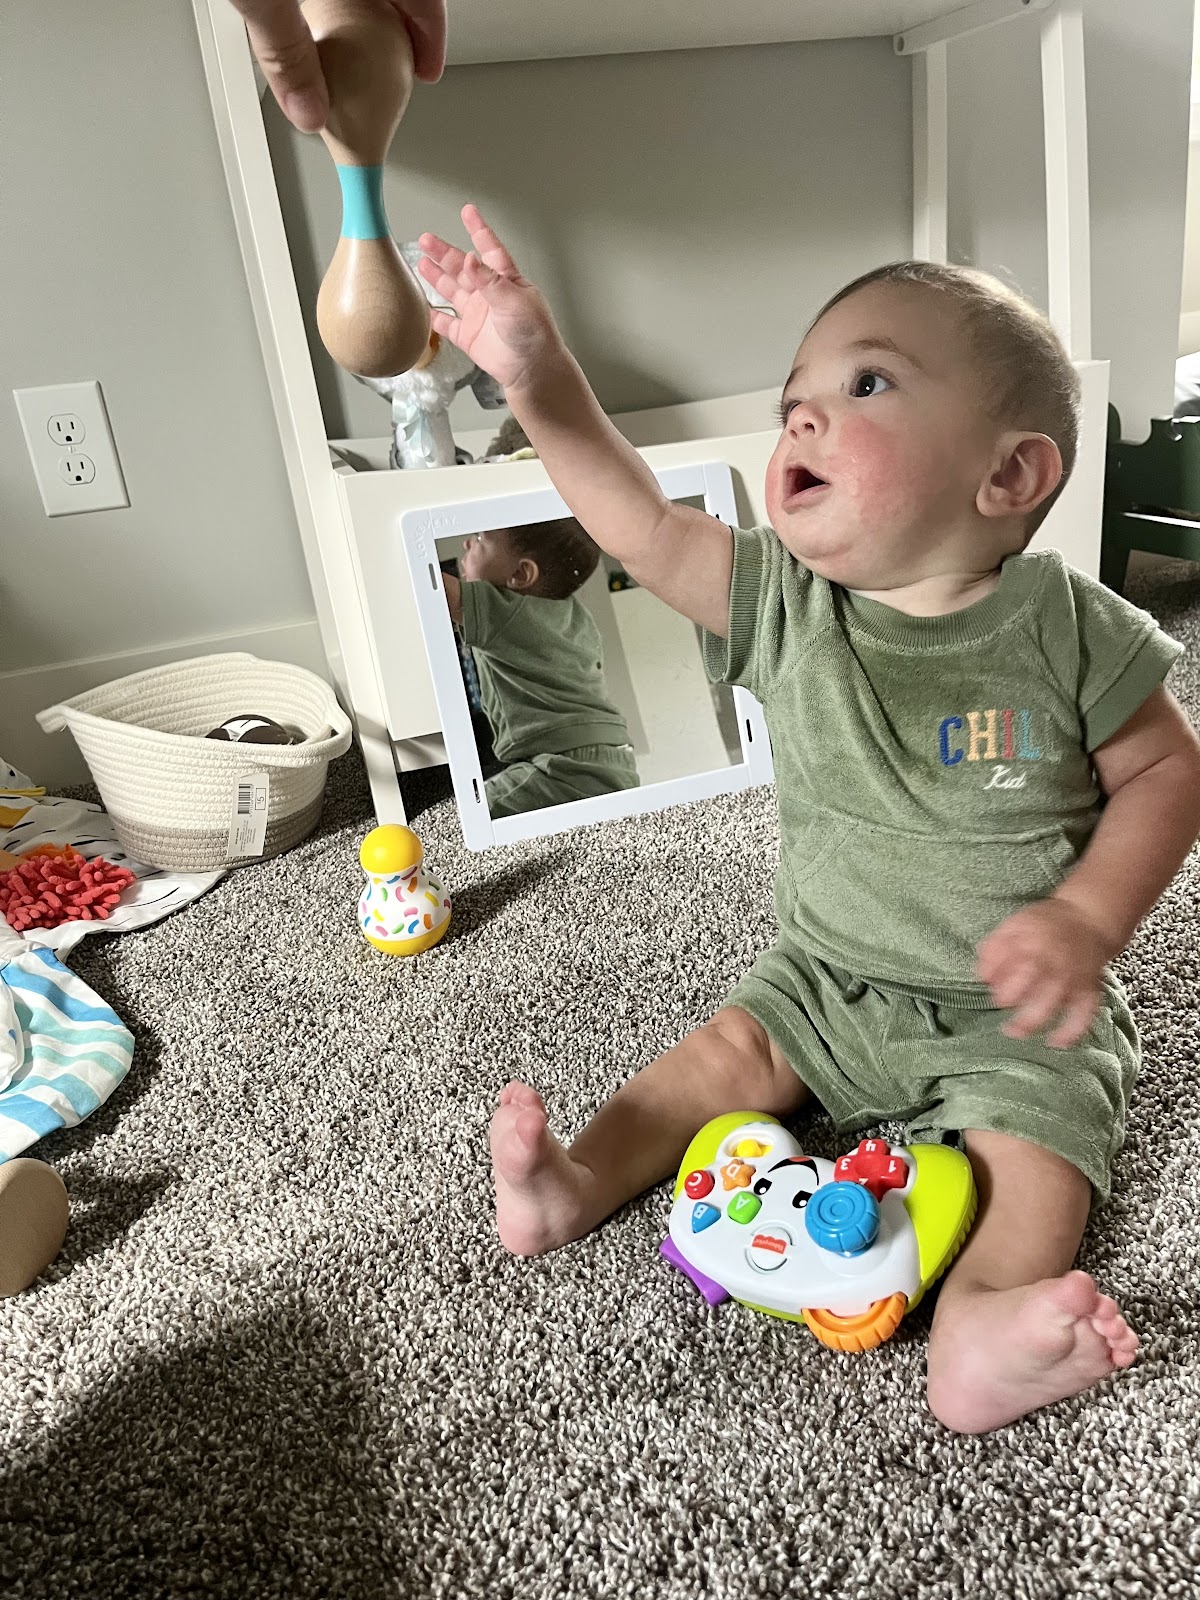 6-month-old activities